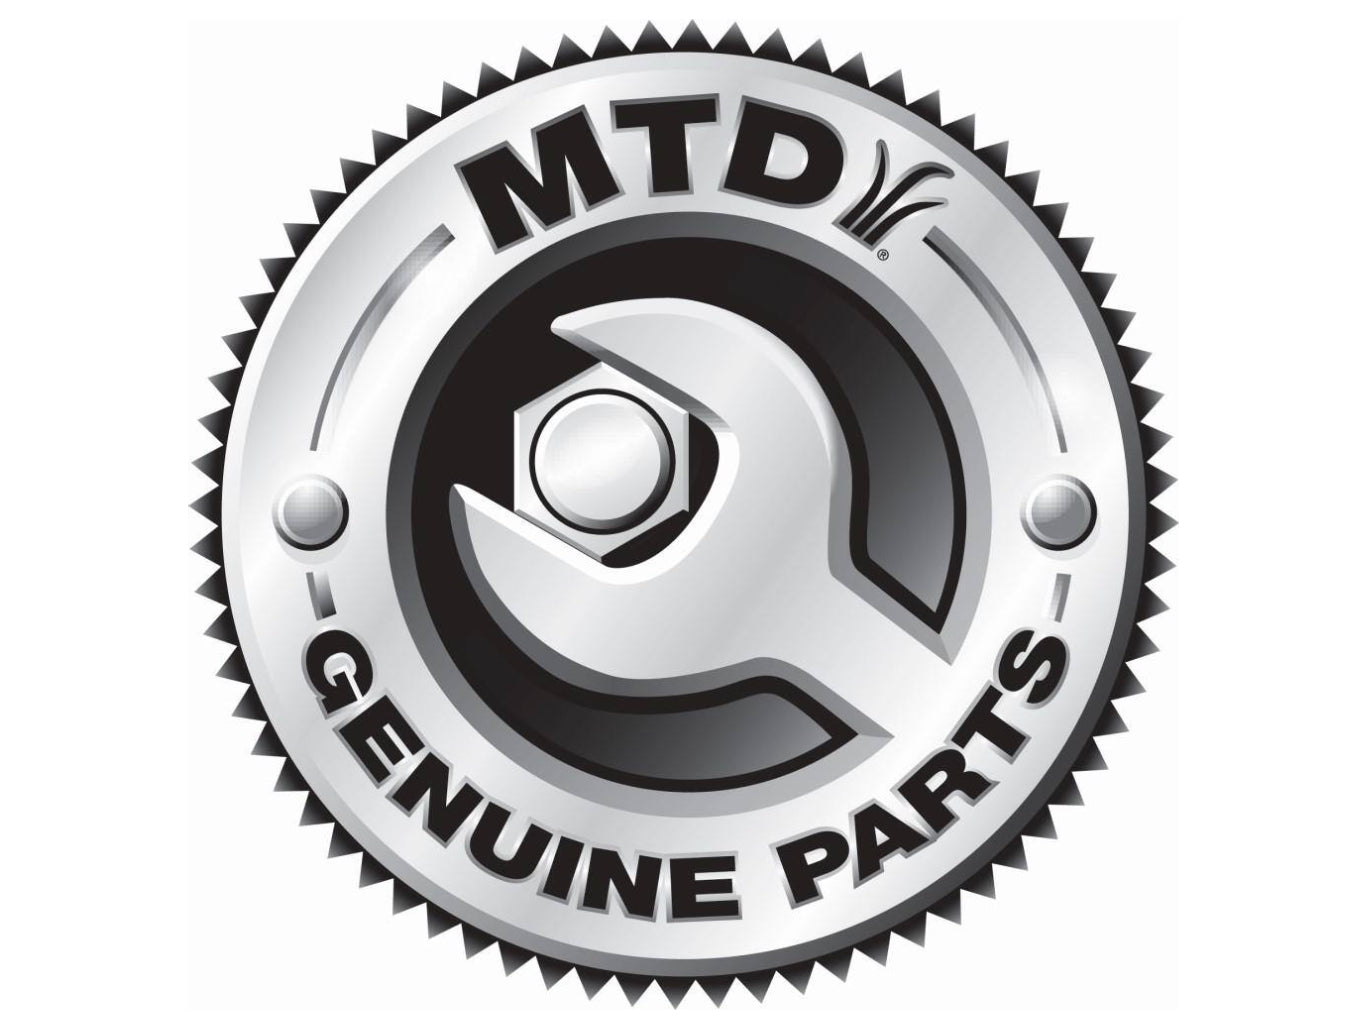 MTD Genuine Factory Parts Original Equipment 3-in-1 Blade Set for Select 42 in. Riding Lawn Mowers with 6-Point Star OE# 942-0616, 942-0616A